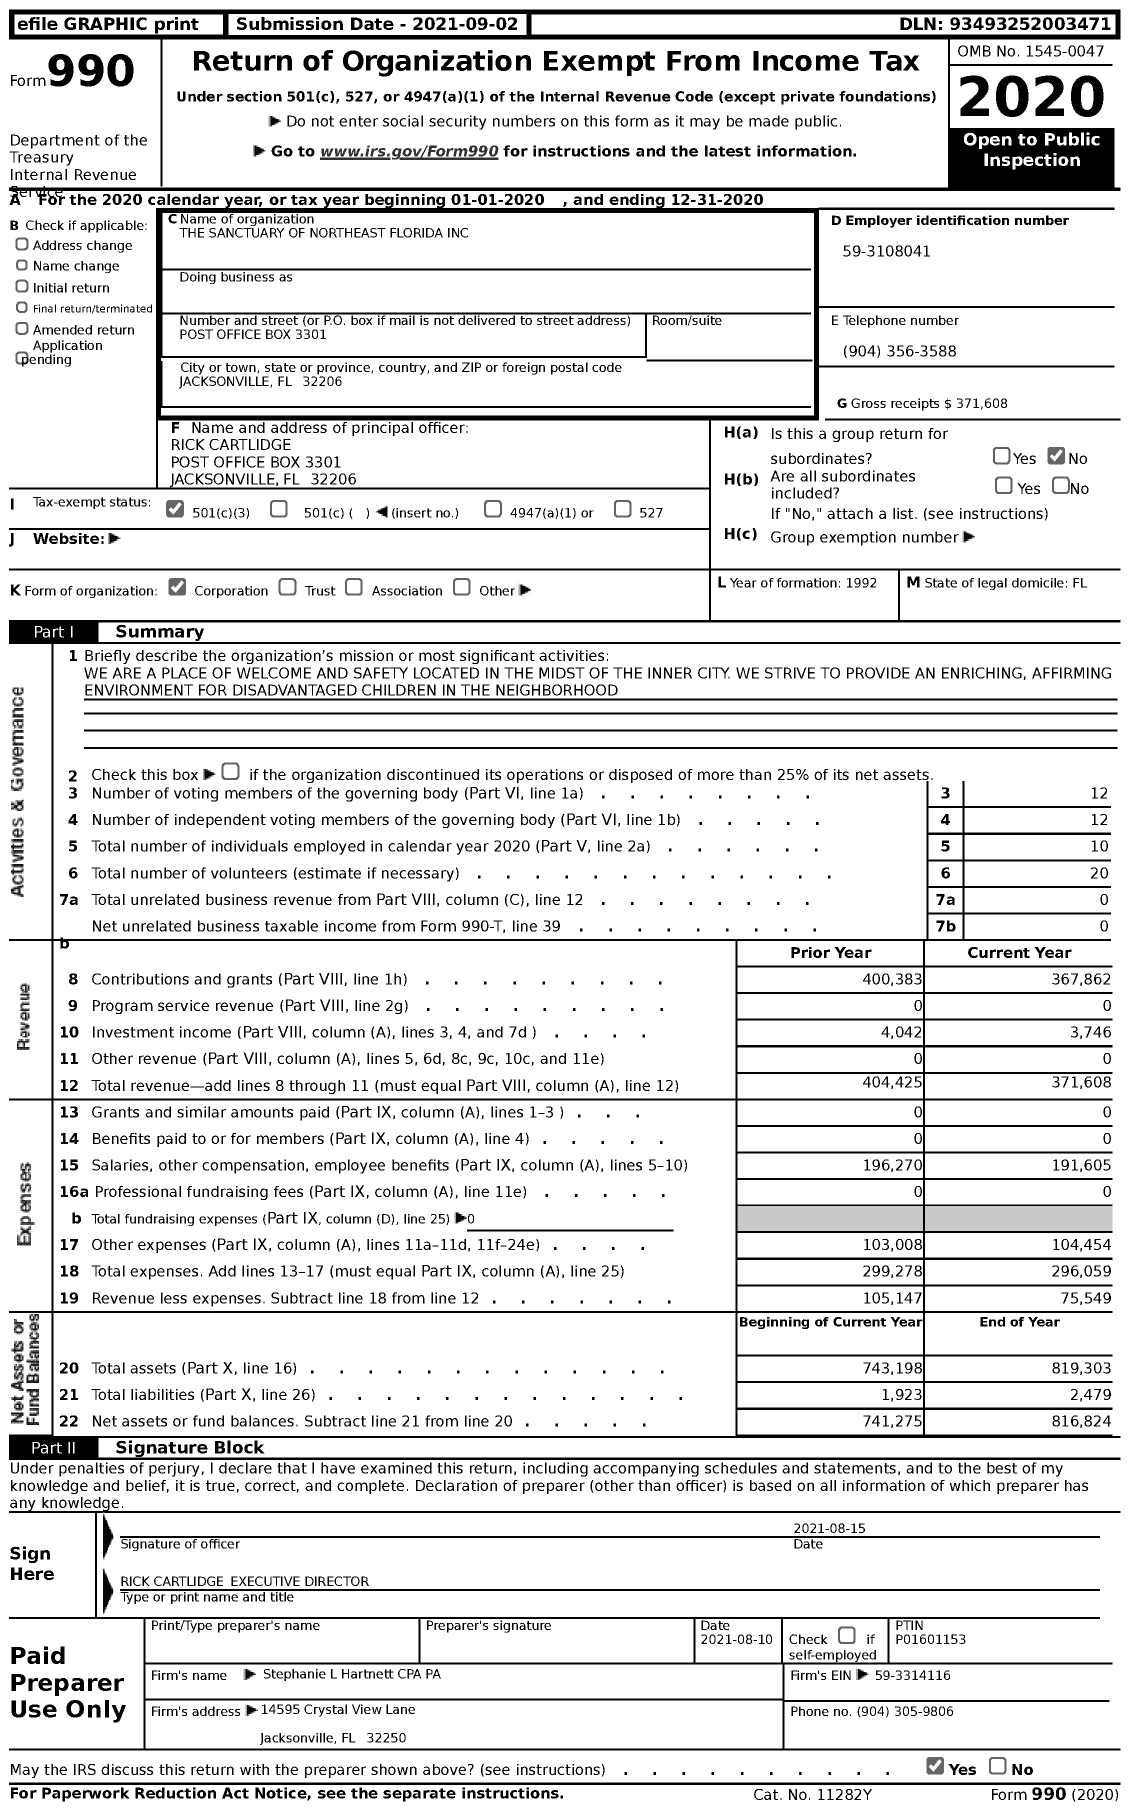 Image of first page of 2020 Form 990 for The Sanctuary of the Northeast Florida